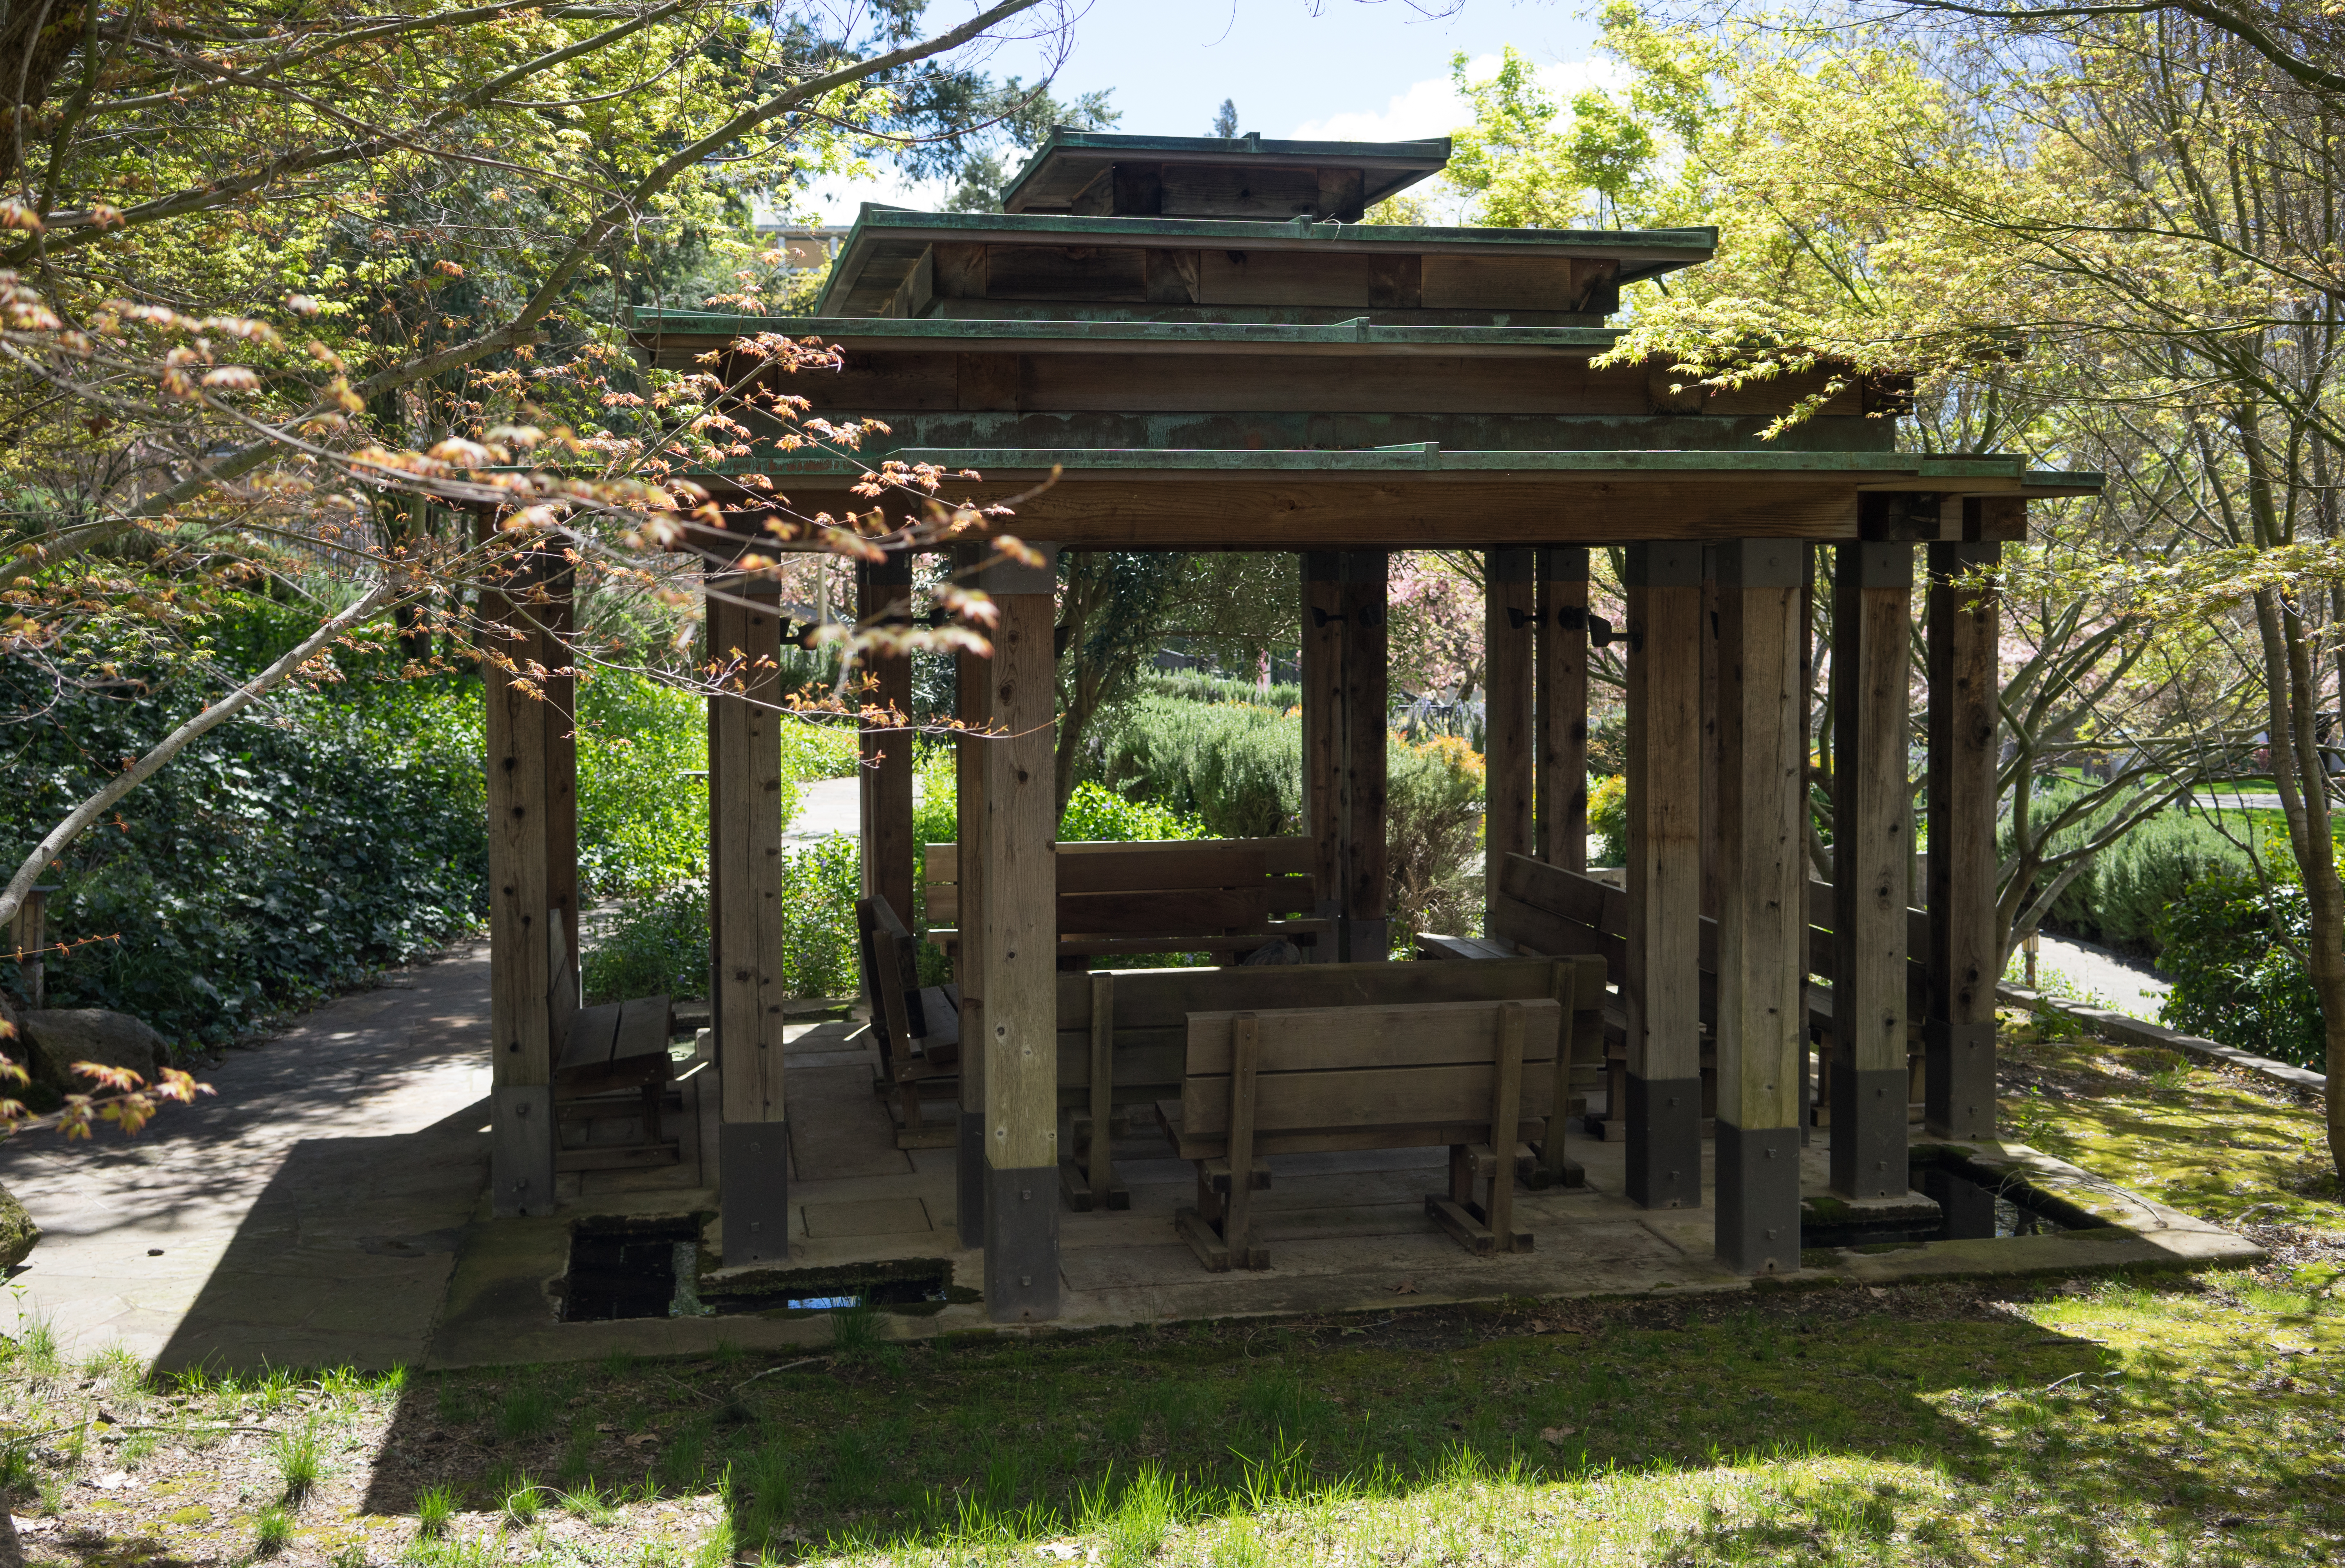 a wooden structure with benches and a gazebo